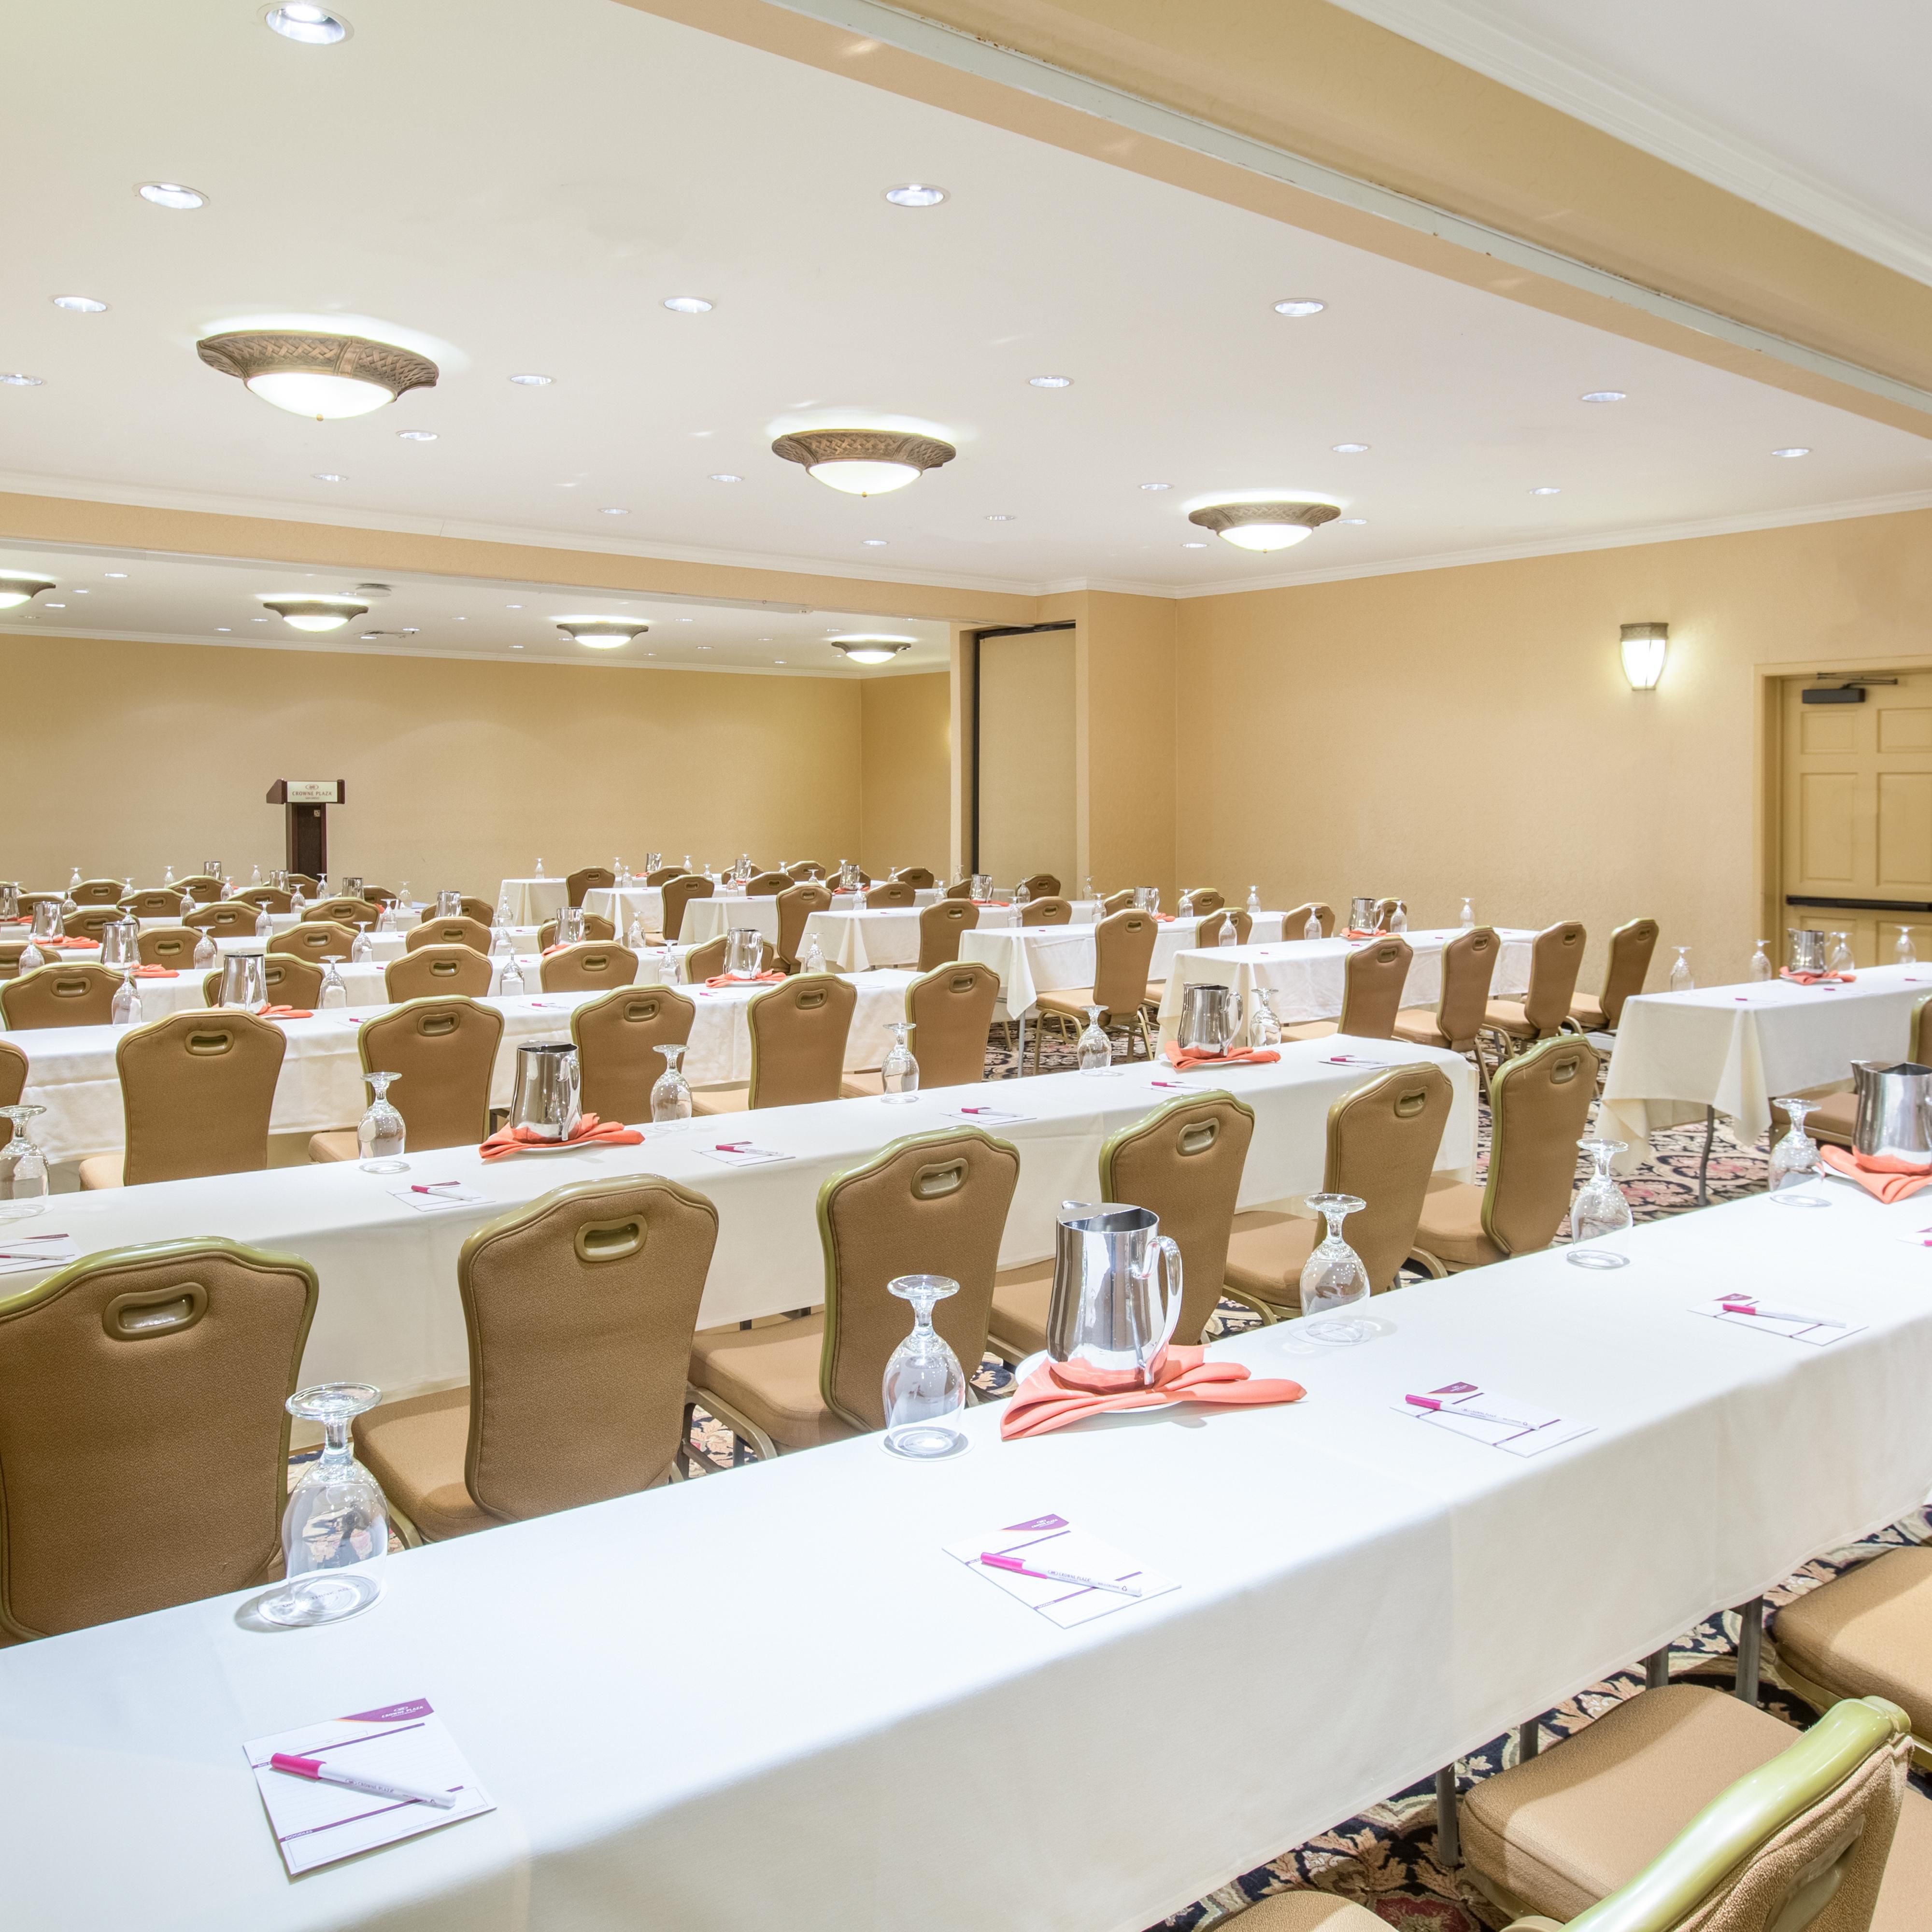 Let our Crowne Meetings Director make it perfect every time.